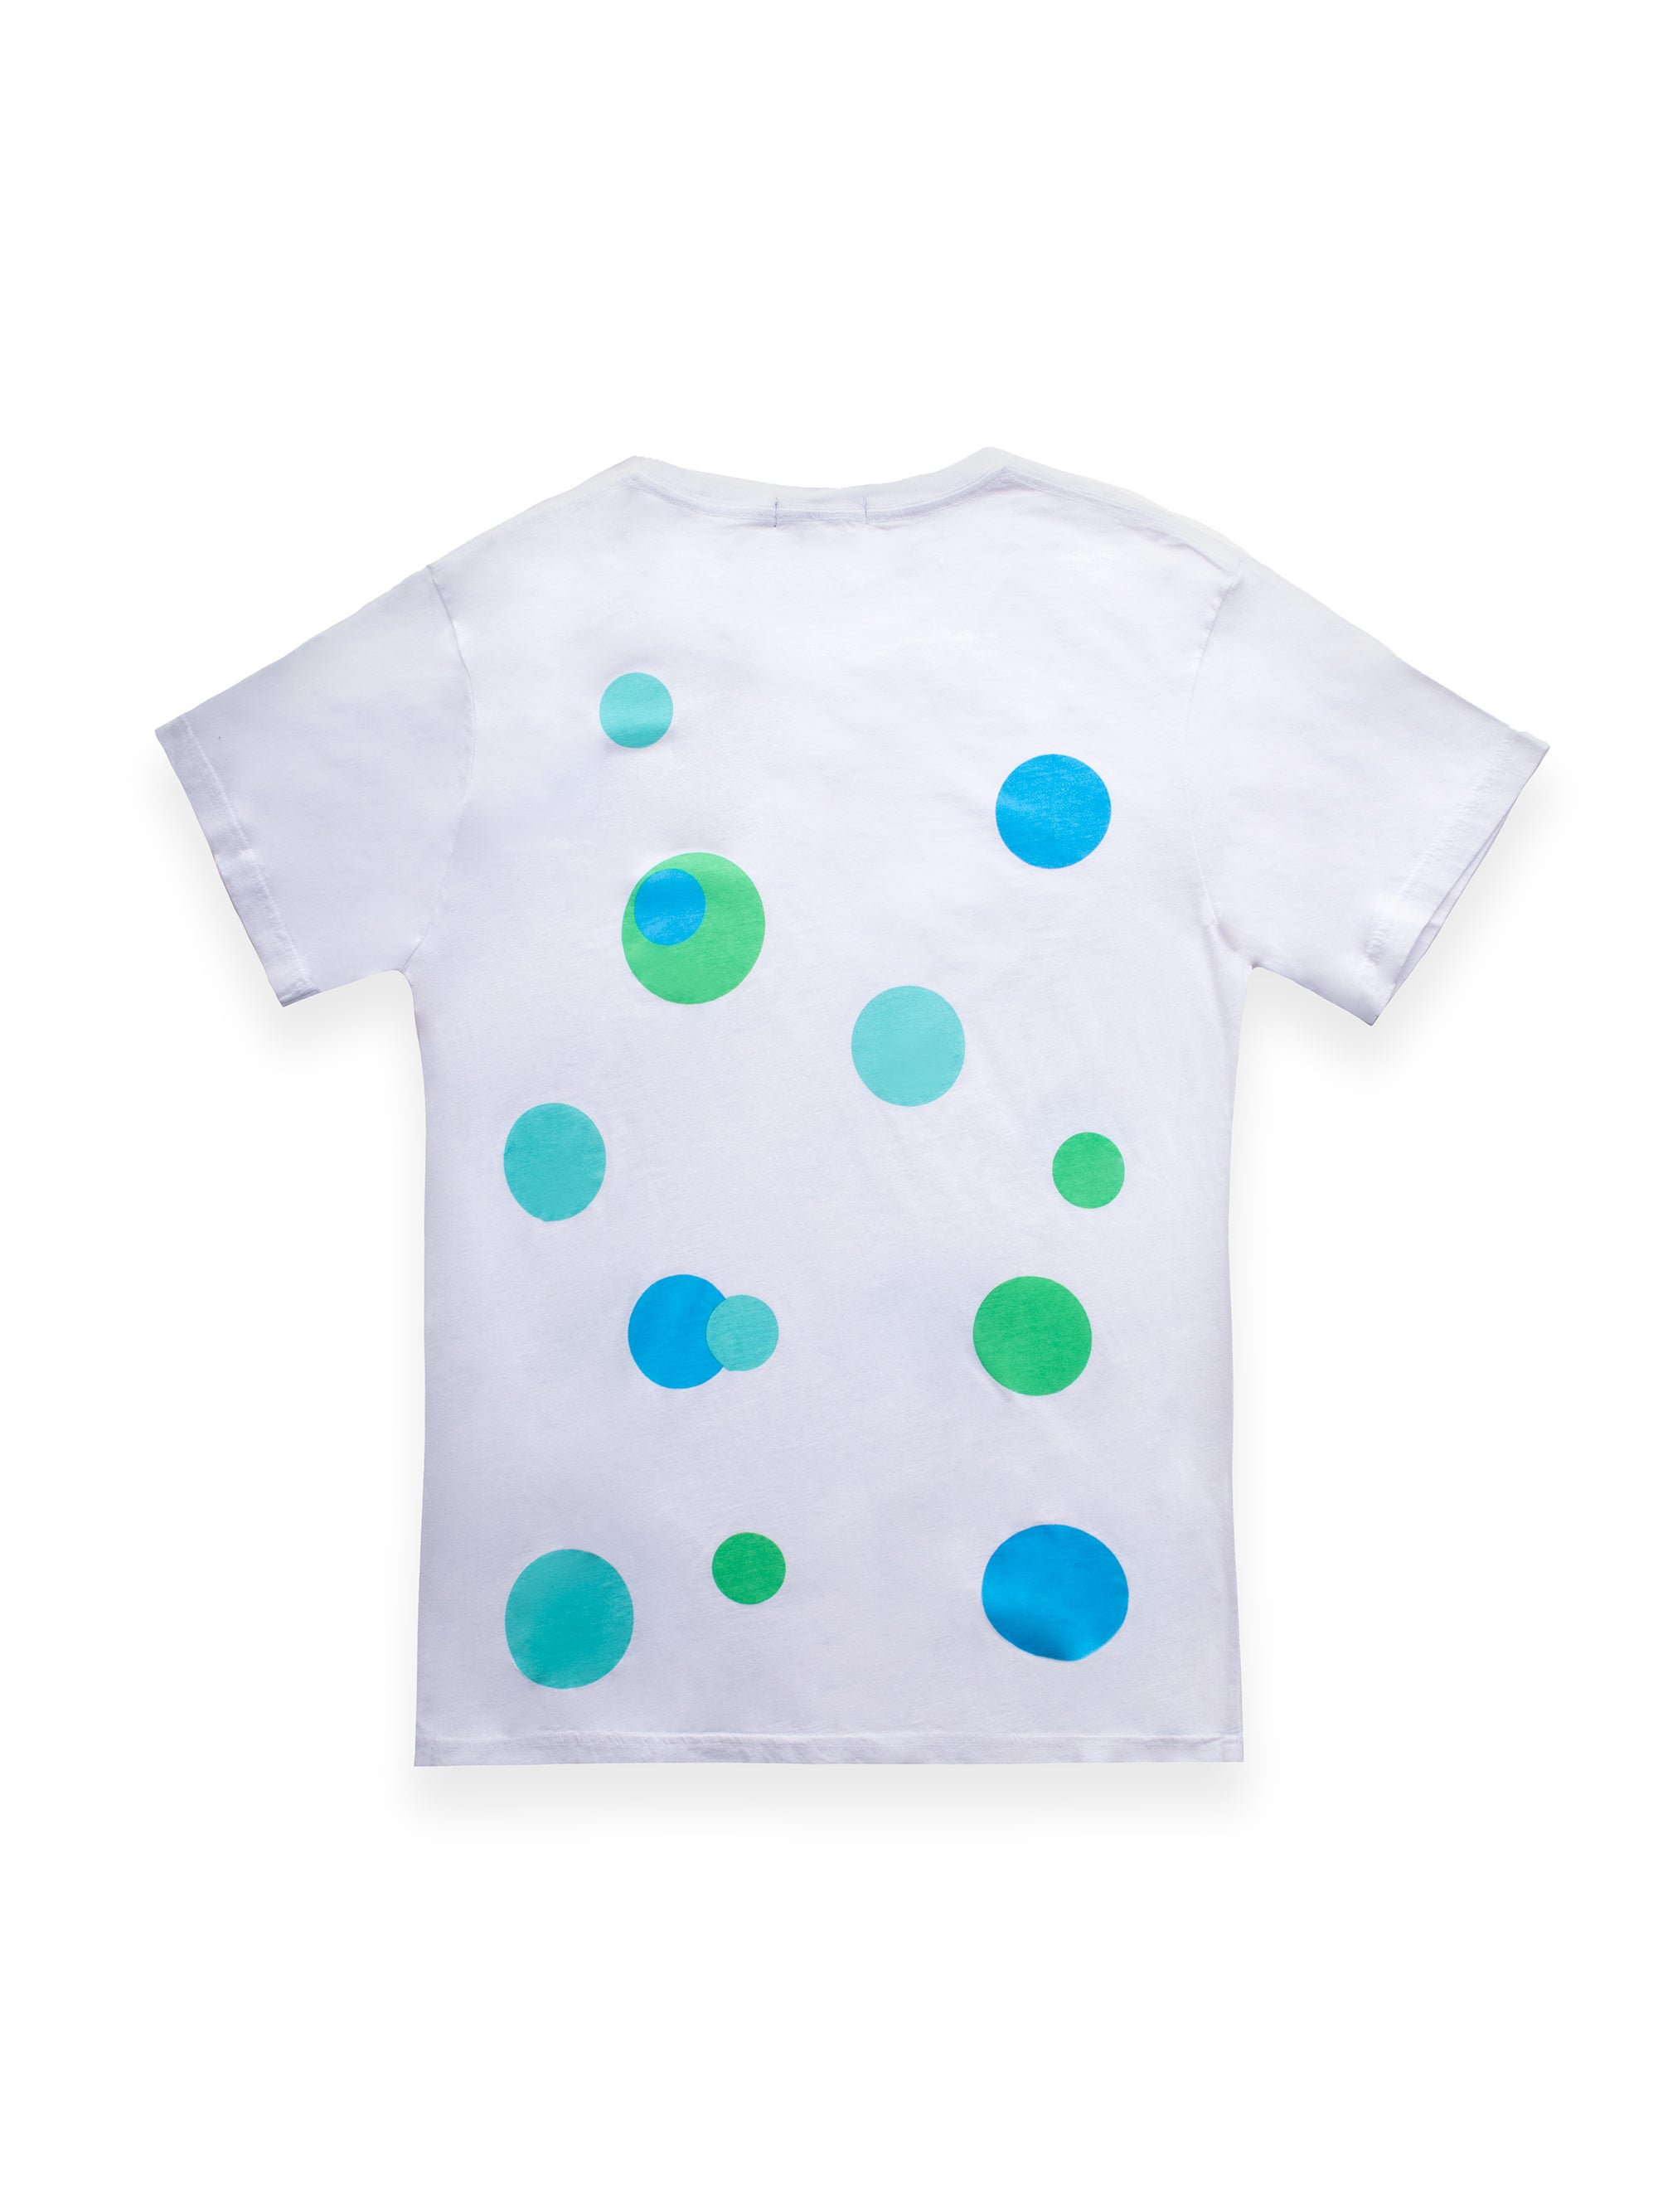 White T-Shirt With Green And Blue Circle Patterns